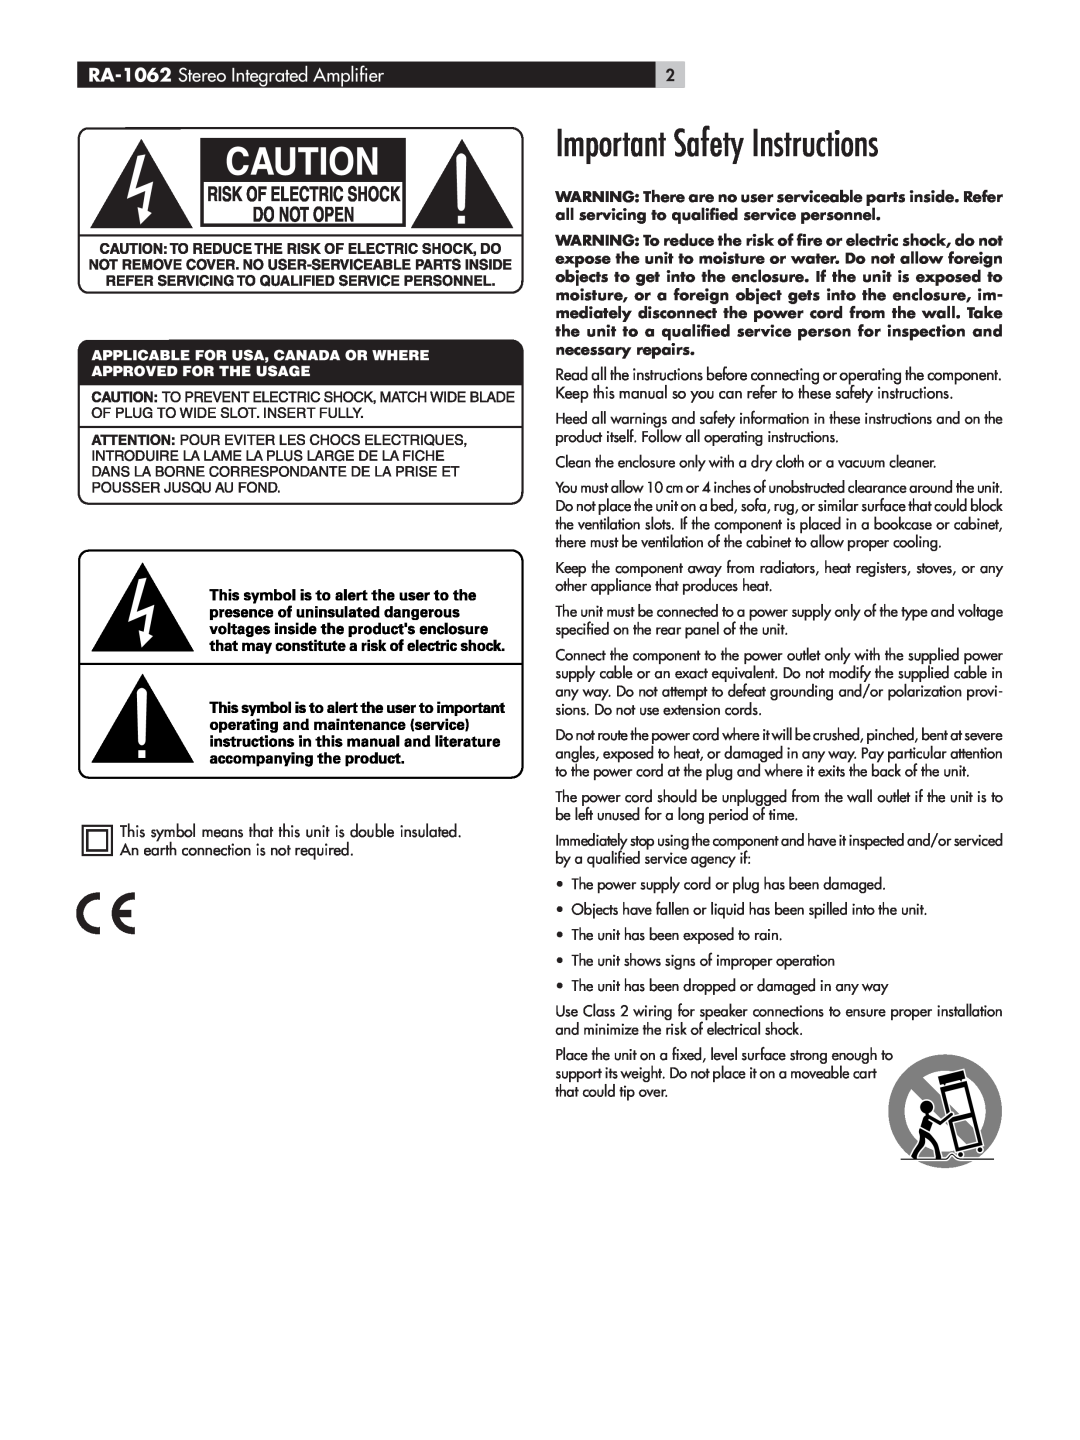 Rotel owner manual Important Safety Instructions, RA-1062 Stereo Integrated Amplifier 